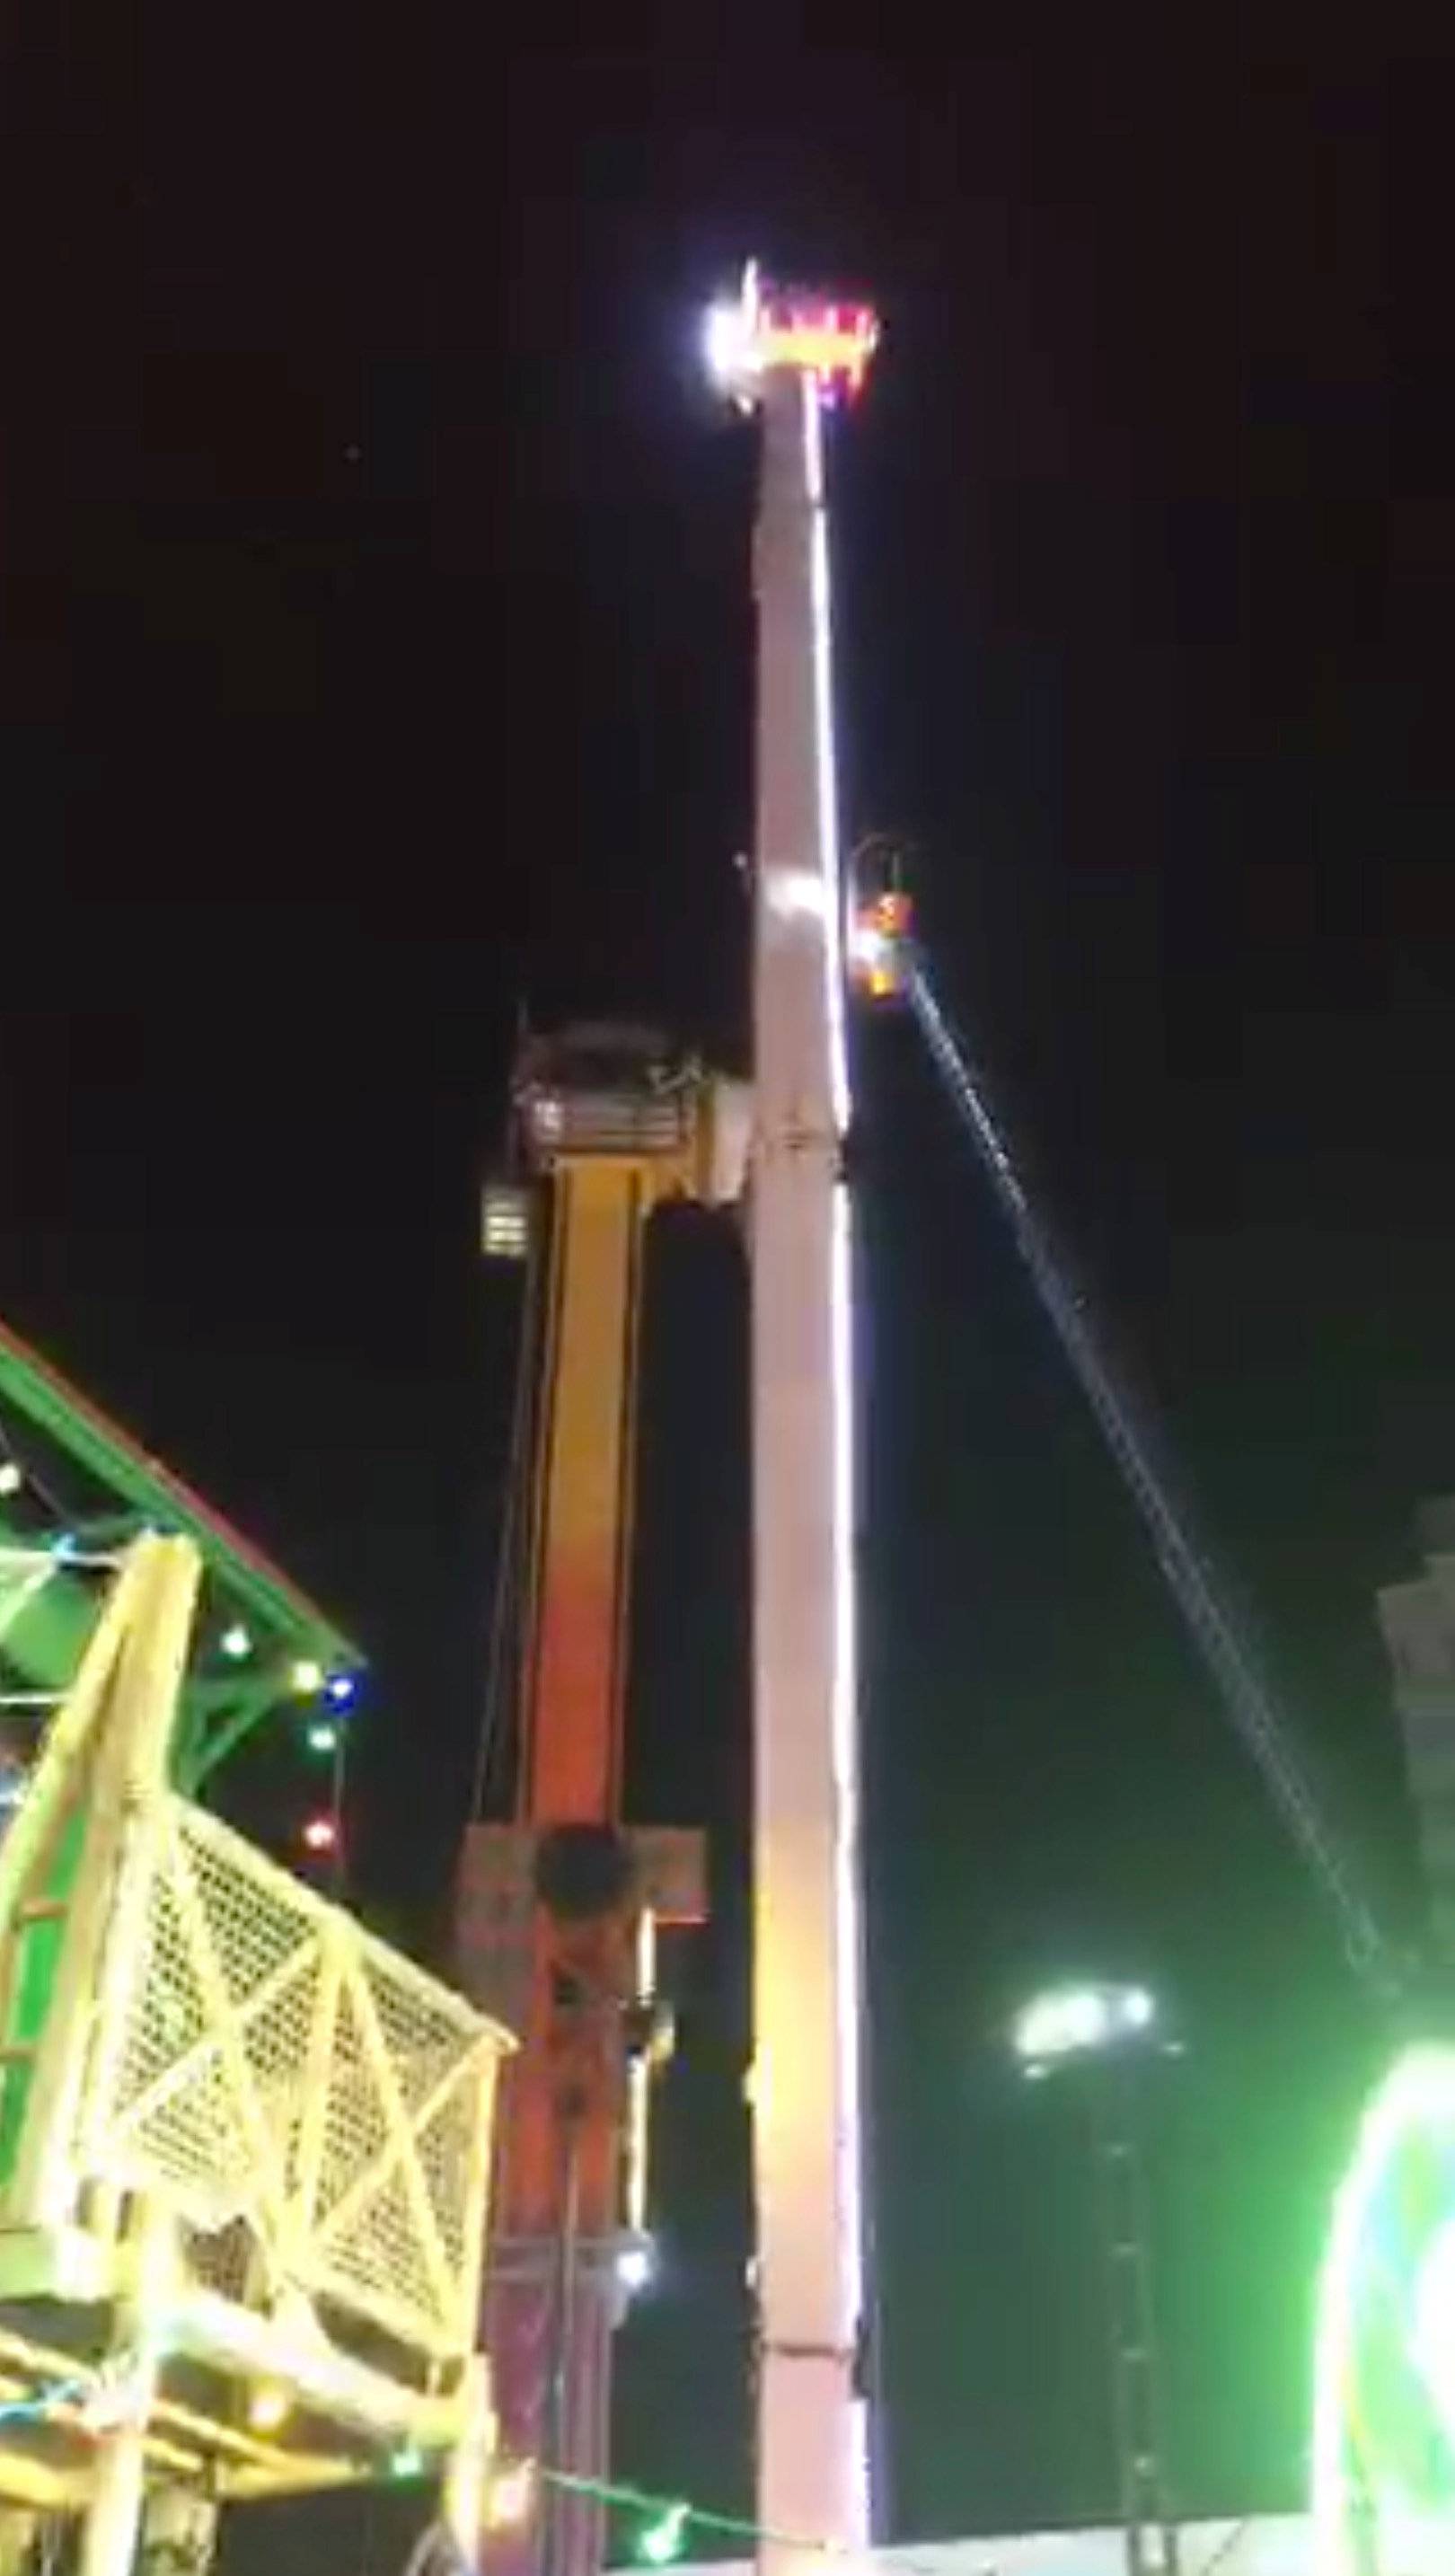 Fair ride goers are trapped on a ride in Rennes